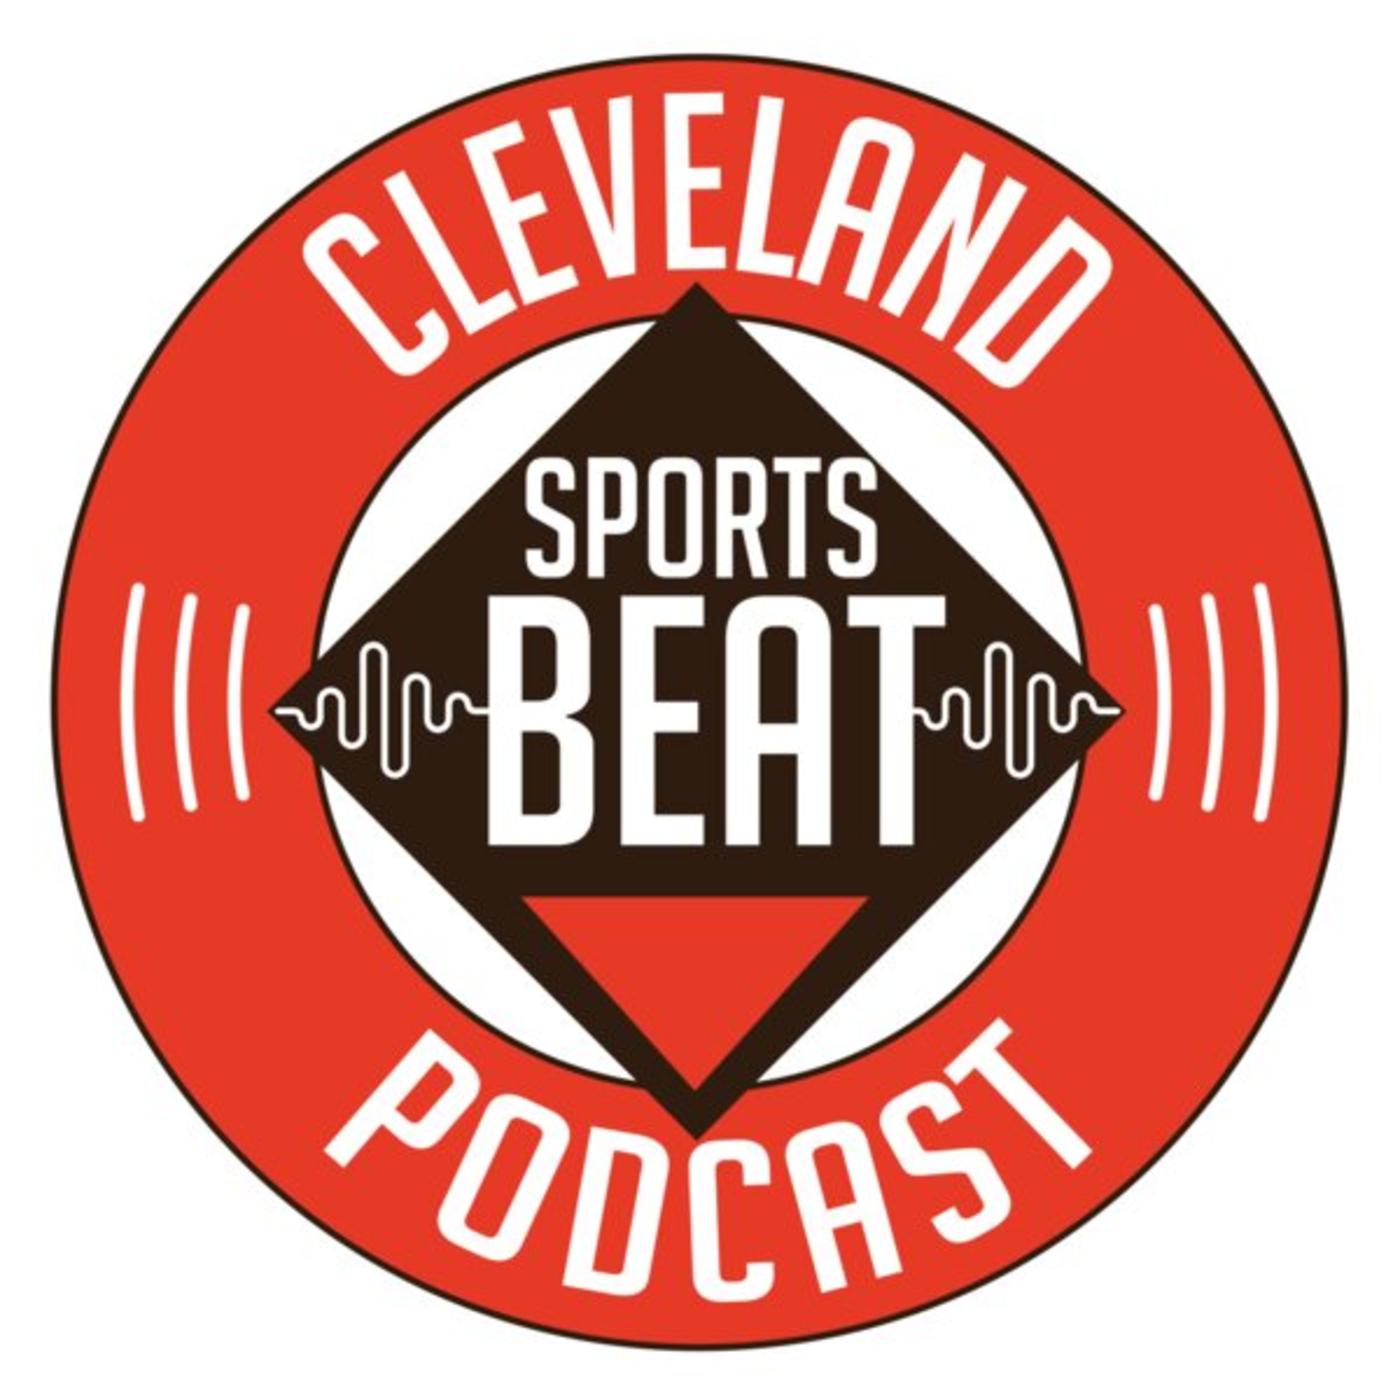 The Cleveland Sports Beat Podcast